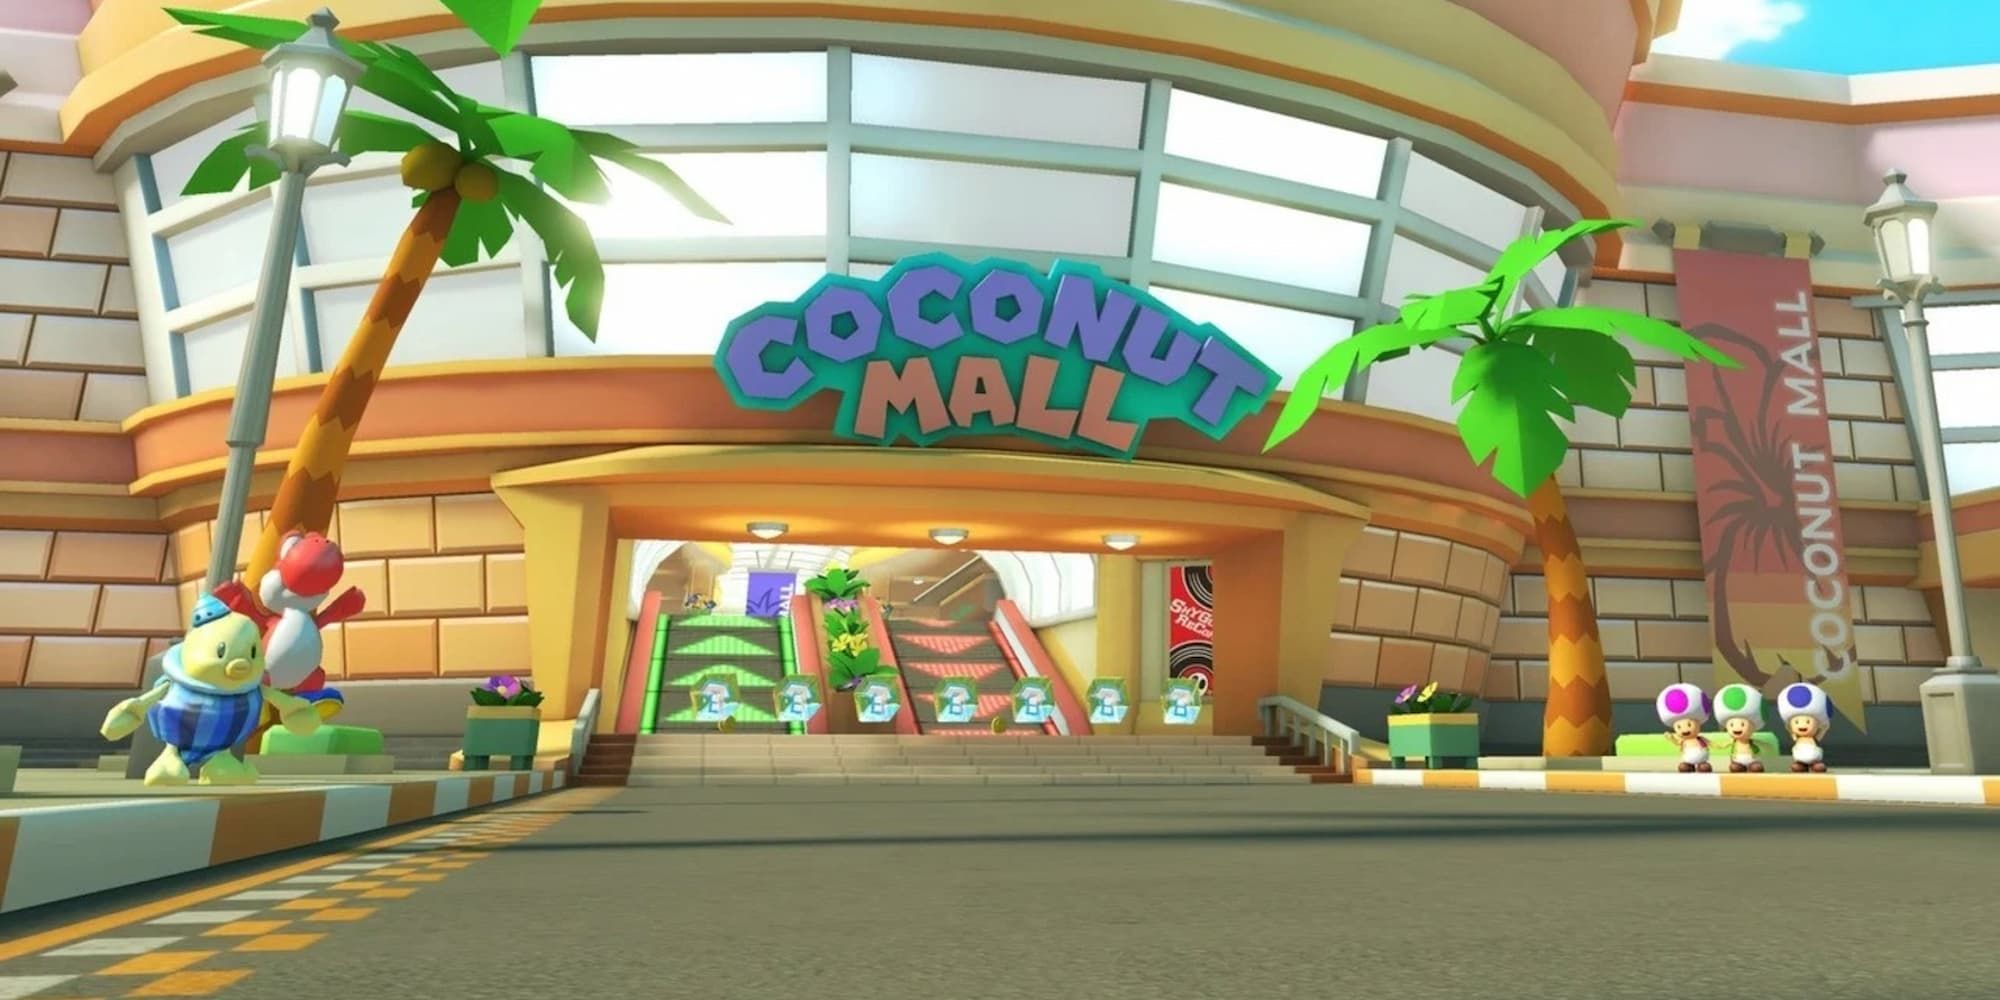 The front of Coconut Mall shows escalators up into the mall, a large sign for the mall, and item blocks at the entrance.